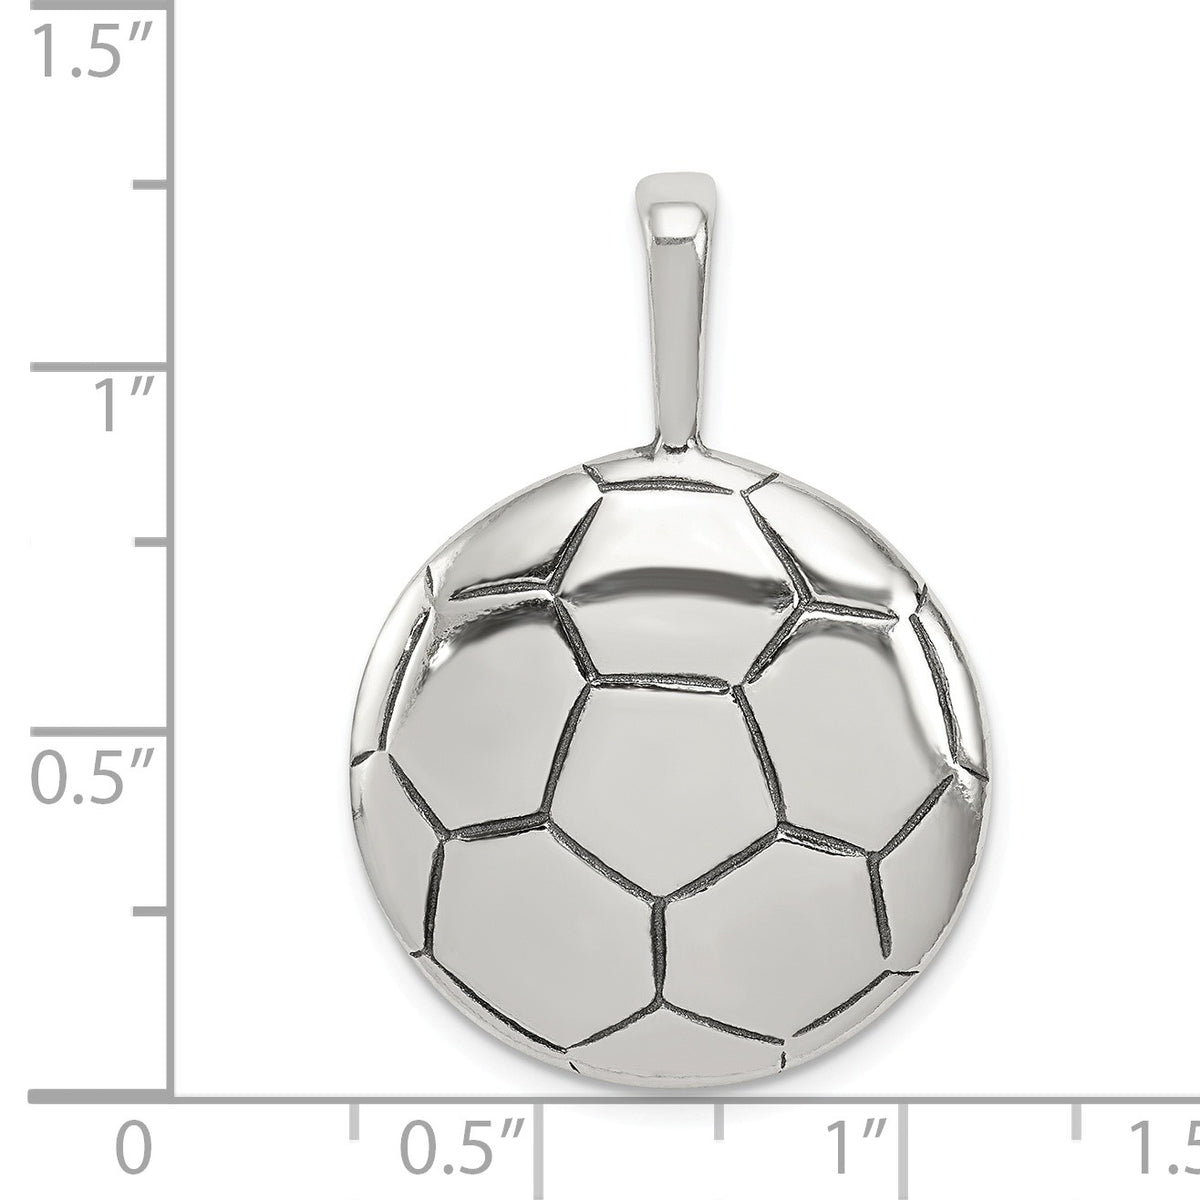 Alternate view of the Sterling Silver 22mm Domed Antiqued Soccer Ball Pendant by The Black Bow Jewelry Co.